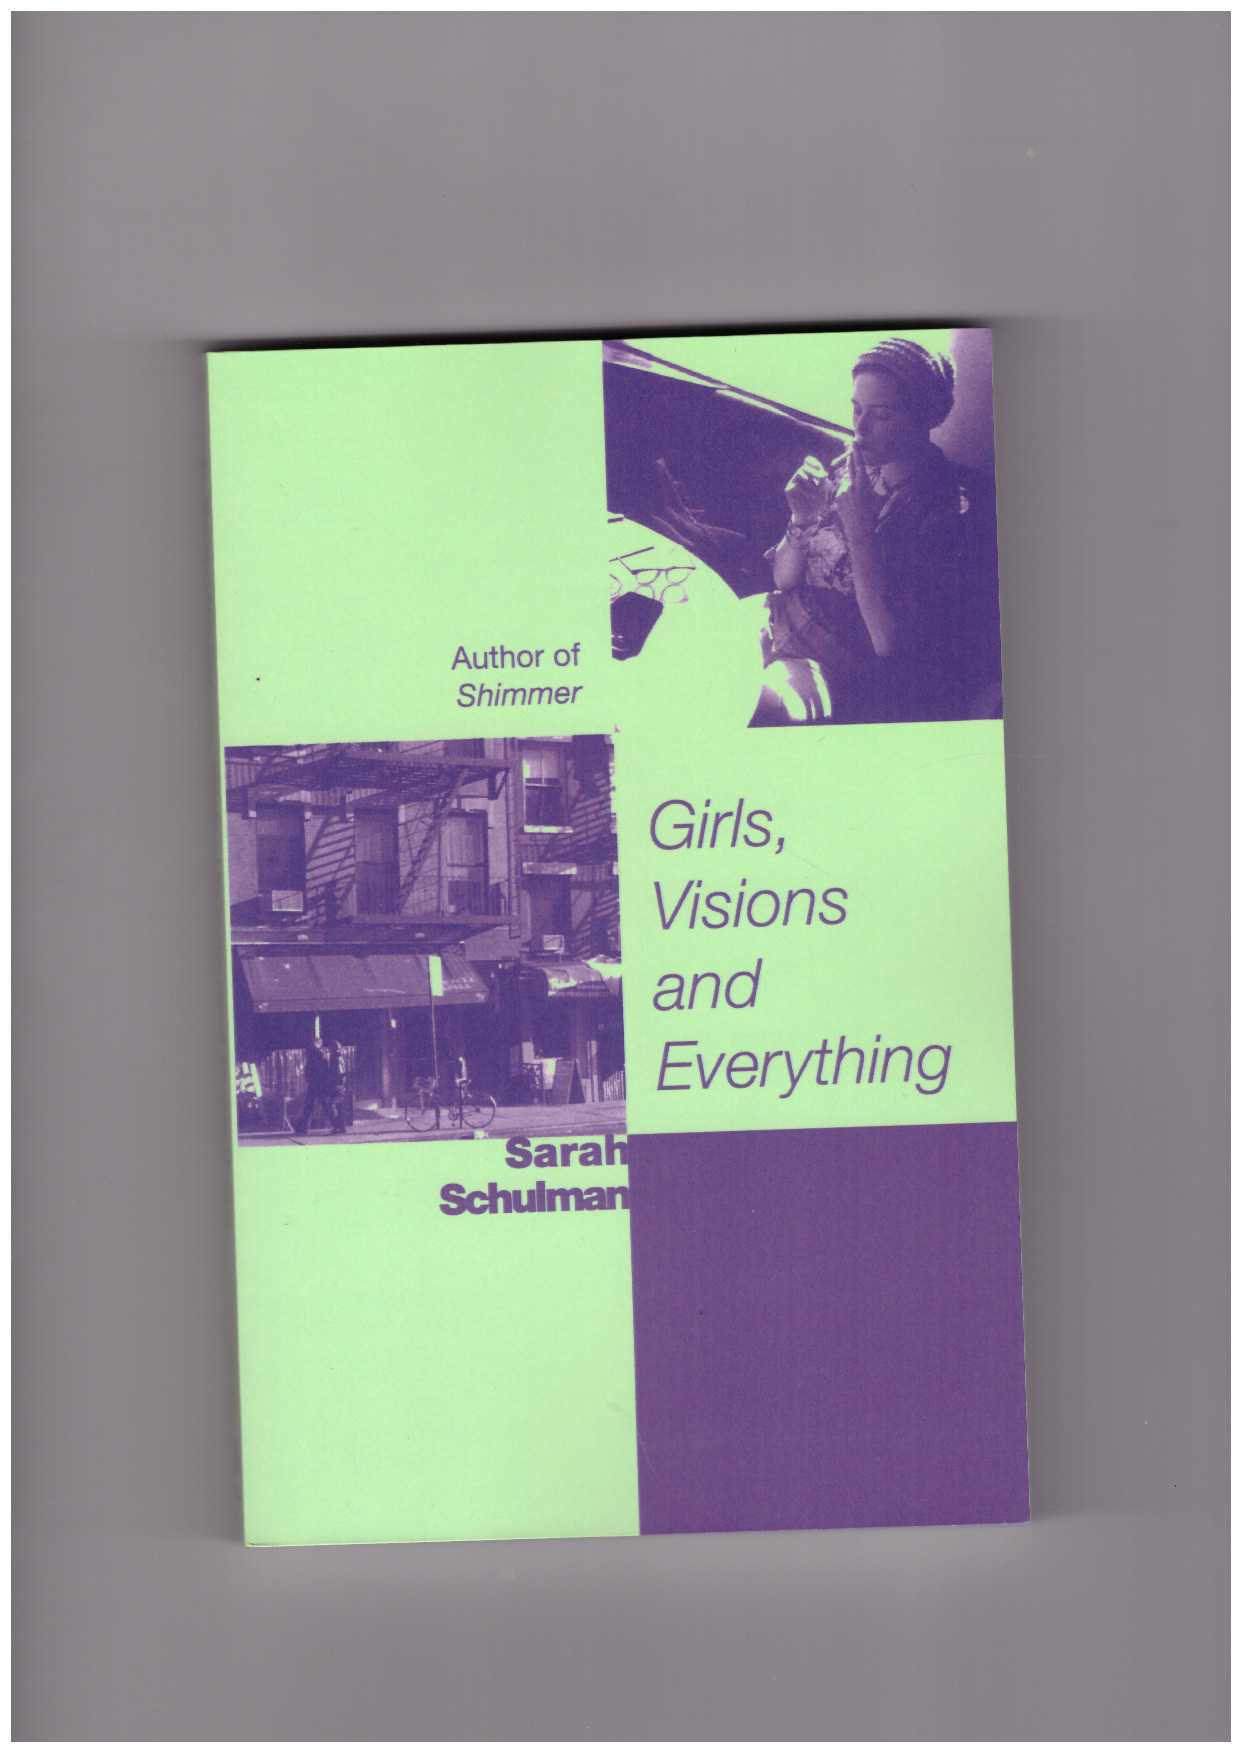 SCHULMAN, Sarah - Girls, Visions and Everything